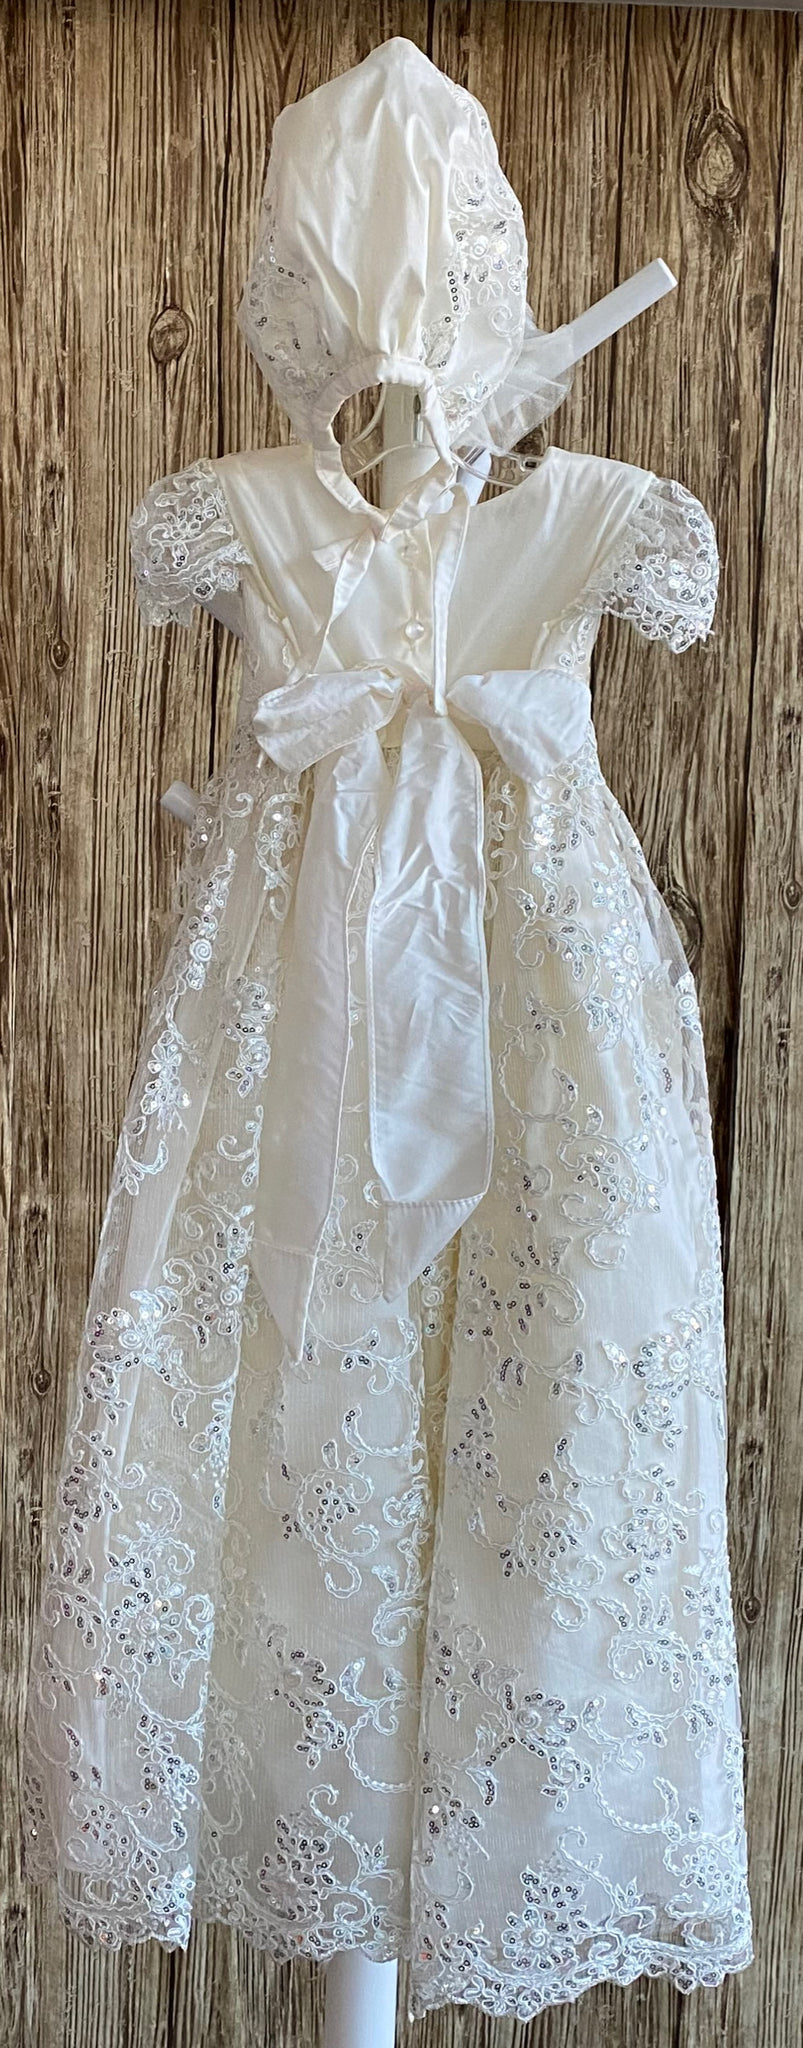 This a beautiful, one-of-a-kind baptism gown.  A lovely gown for a precious child.  Ivory, size 12M Satin bodice with embroidered sequins lace Embroidered sequins lace cap sleeve Embroidered sequins lace skirt overlay Matching bonnet